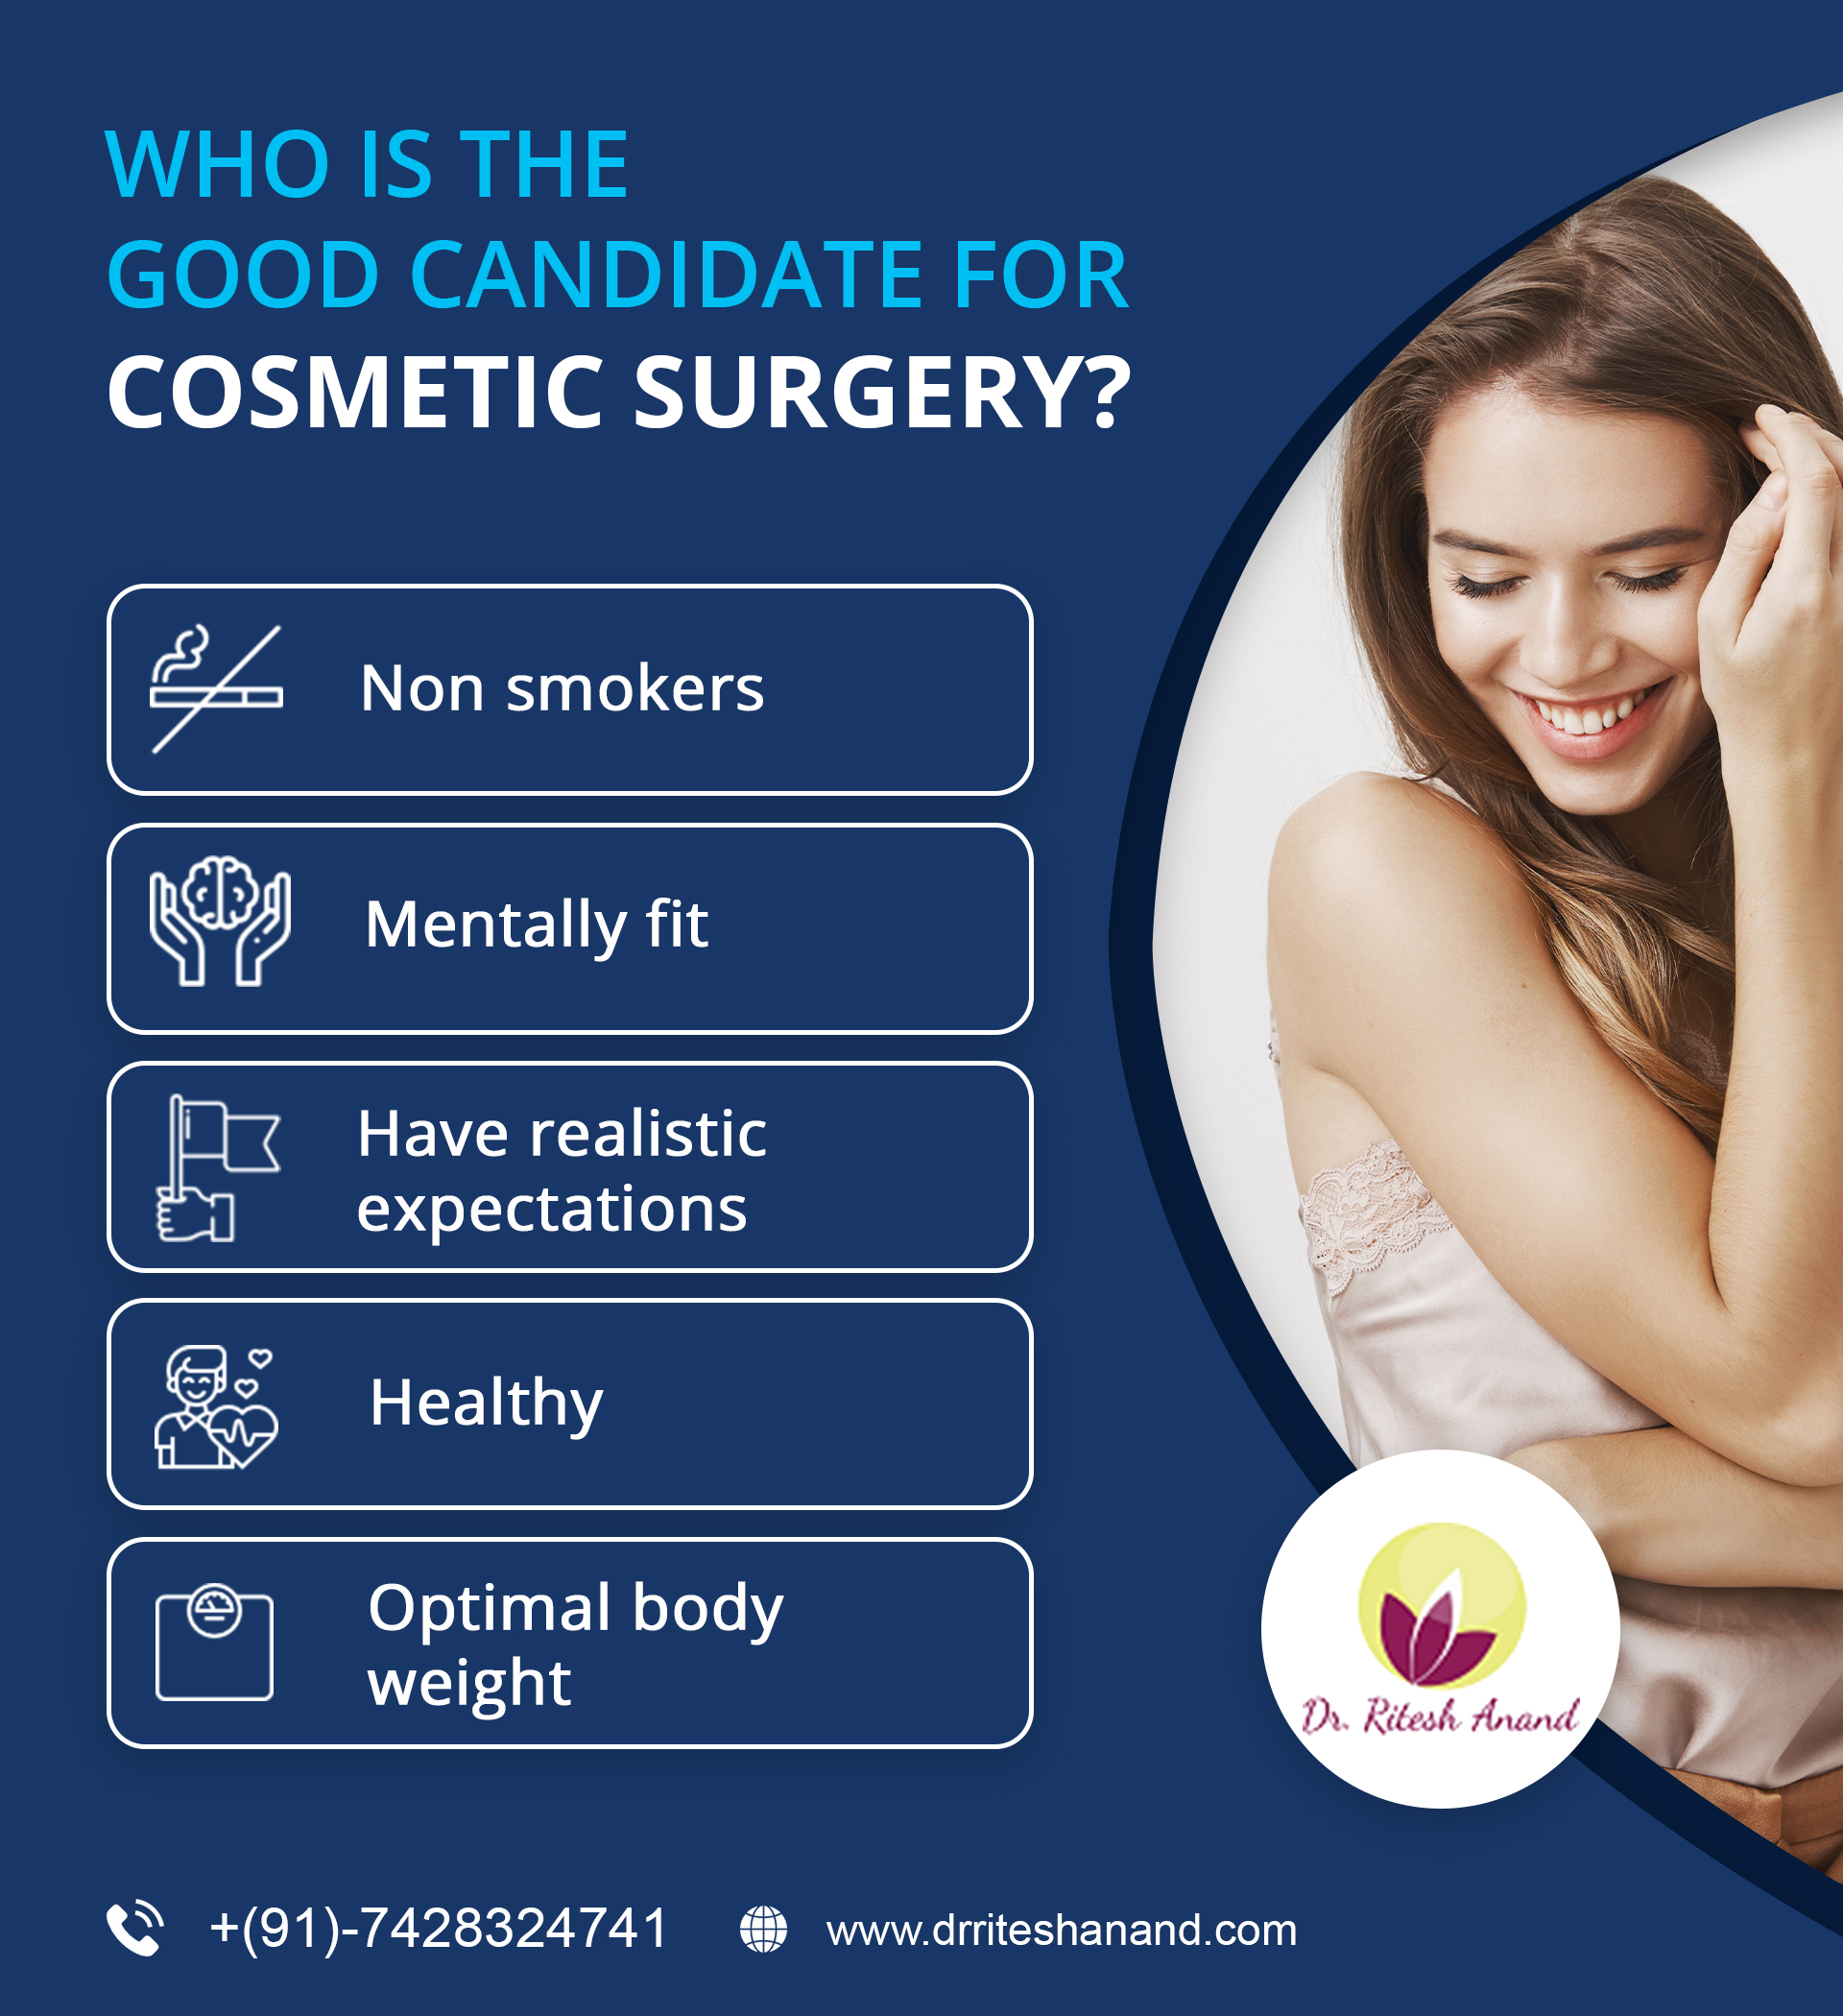 Who Is a Good Candidate for Cosmetic Surgery